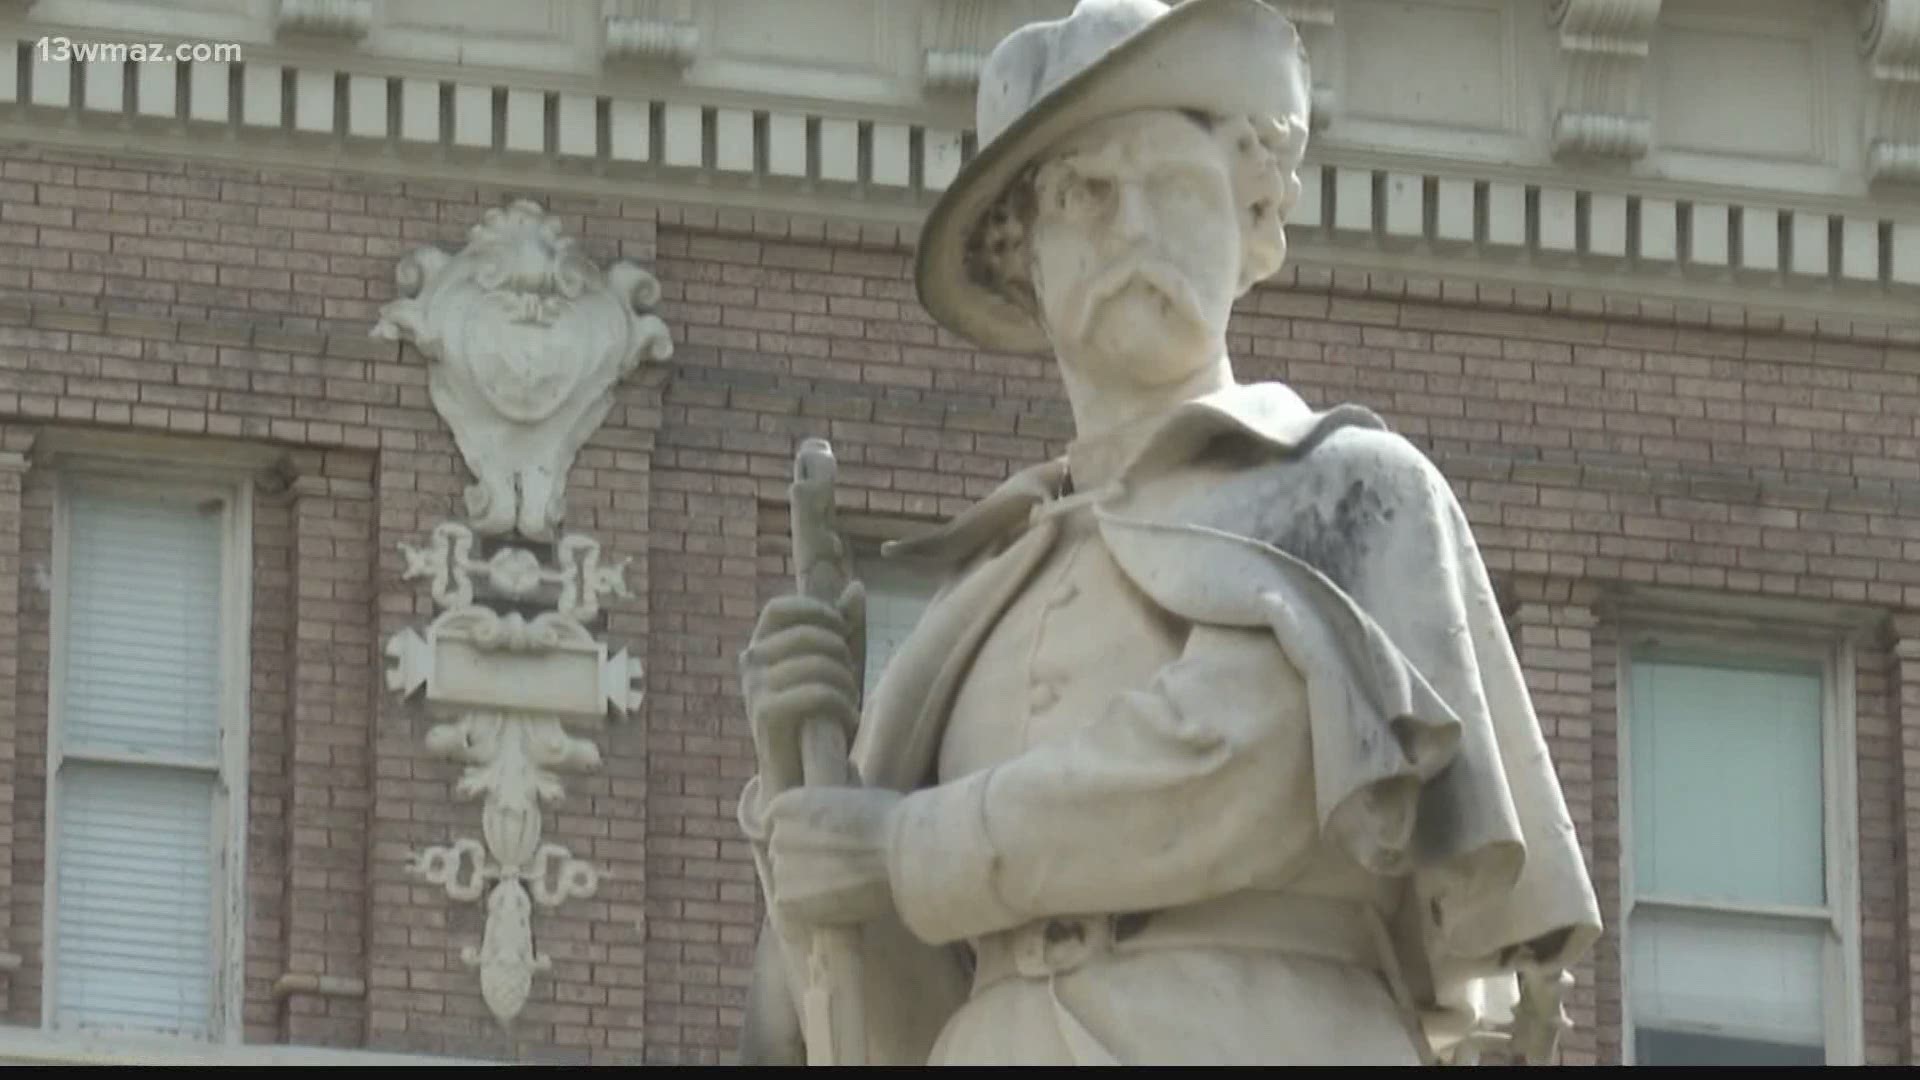 Bibb commission votes to move the Confederate monuments.